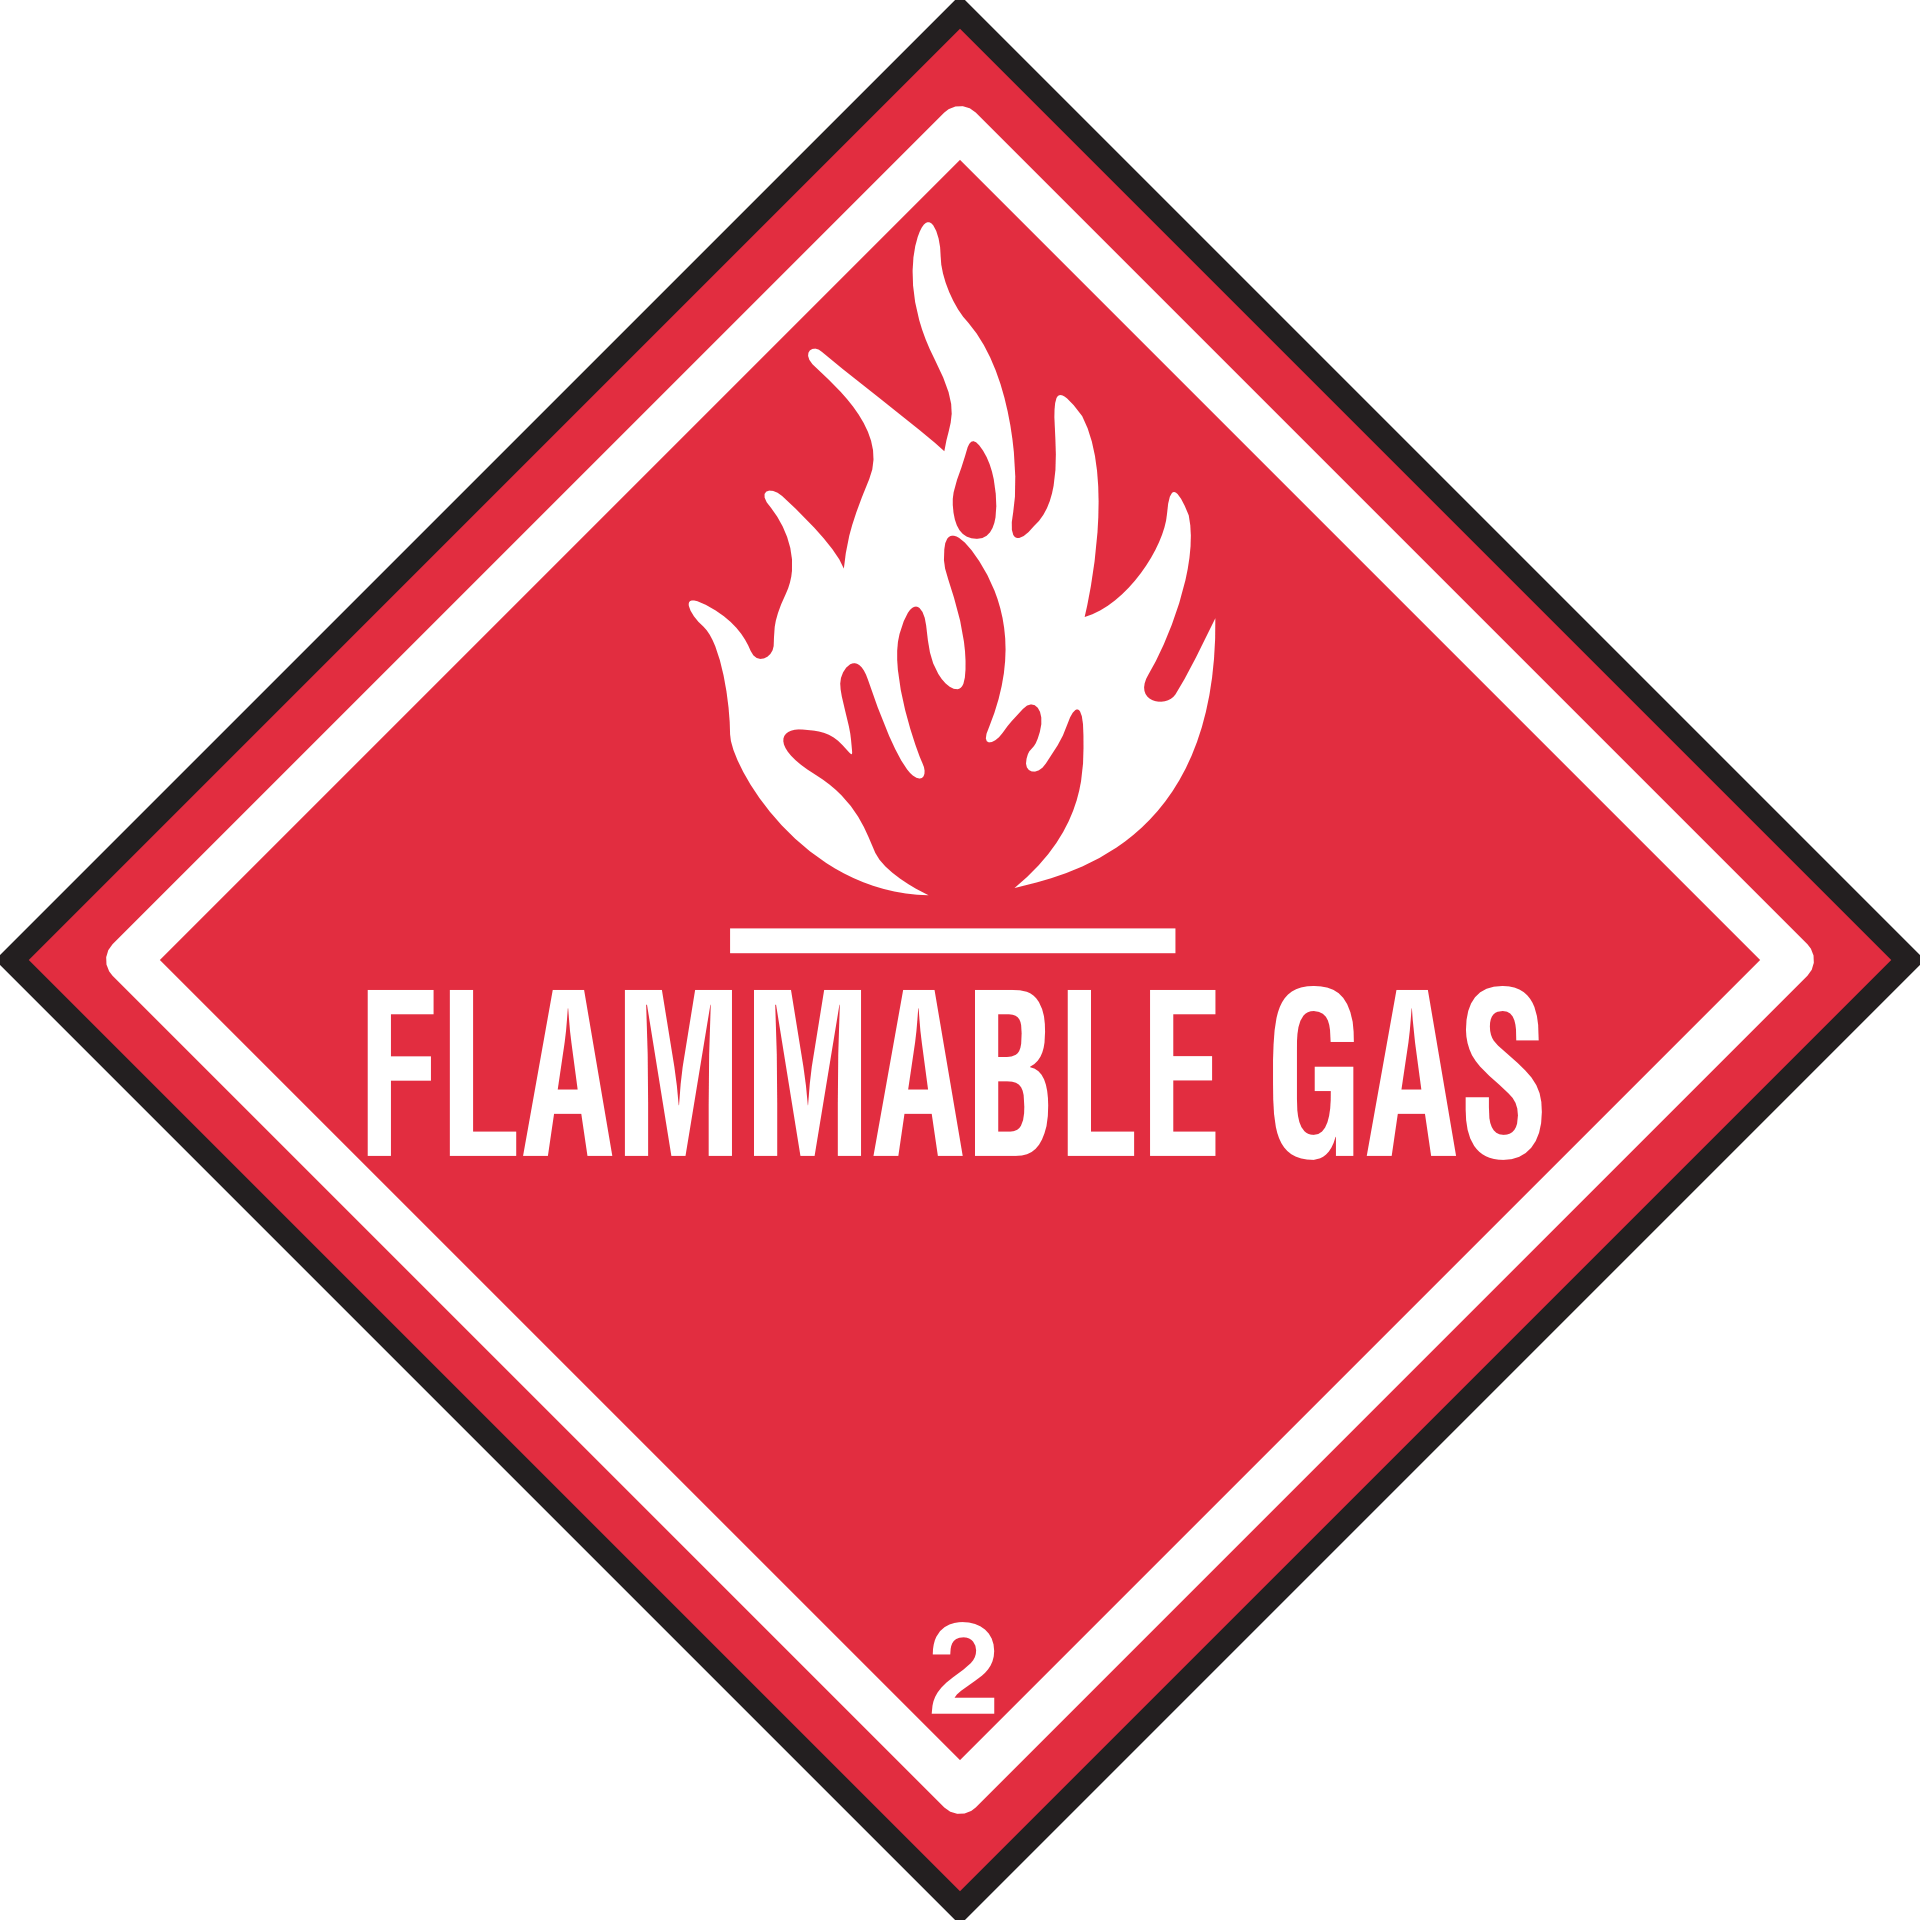 Flammable gas NFPA warning label